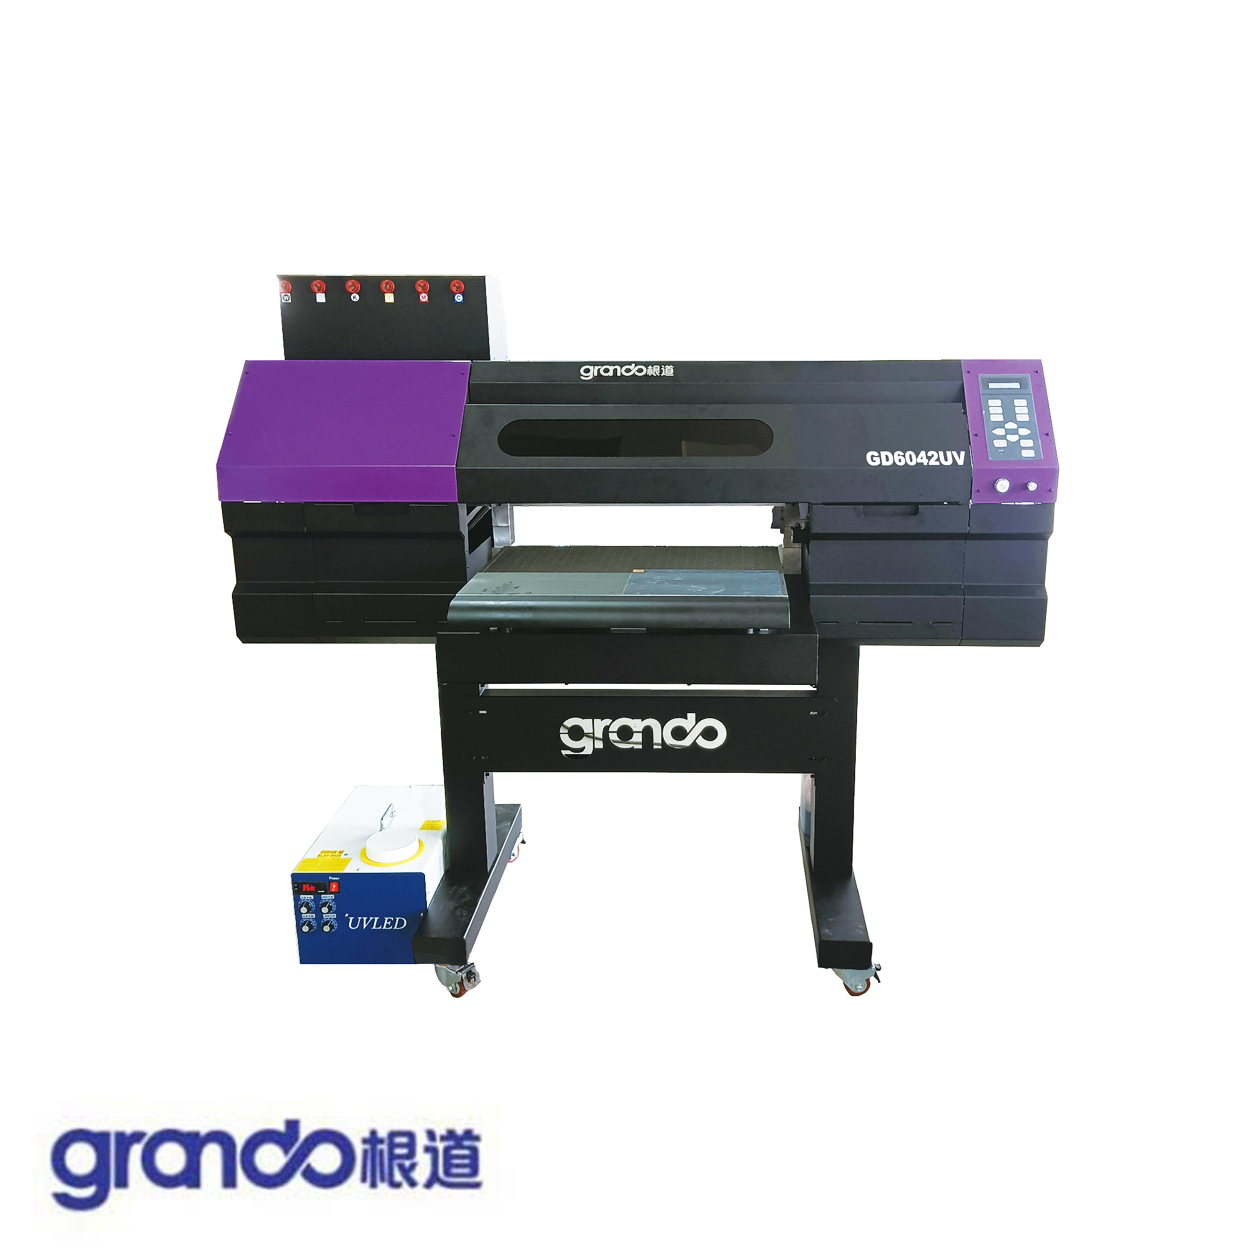 600mm-420mm Customized Crystal Label Transfer Printer with Two Print Heads